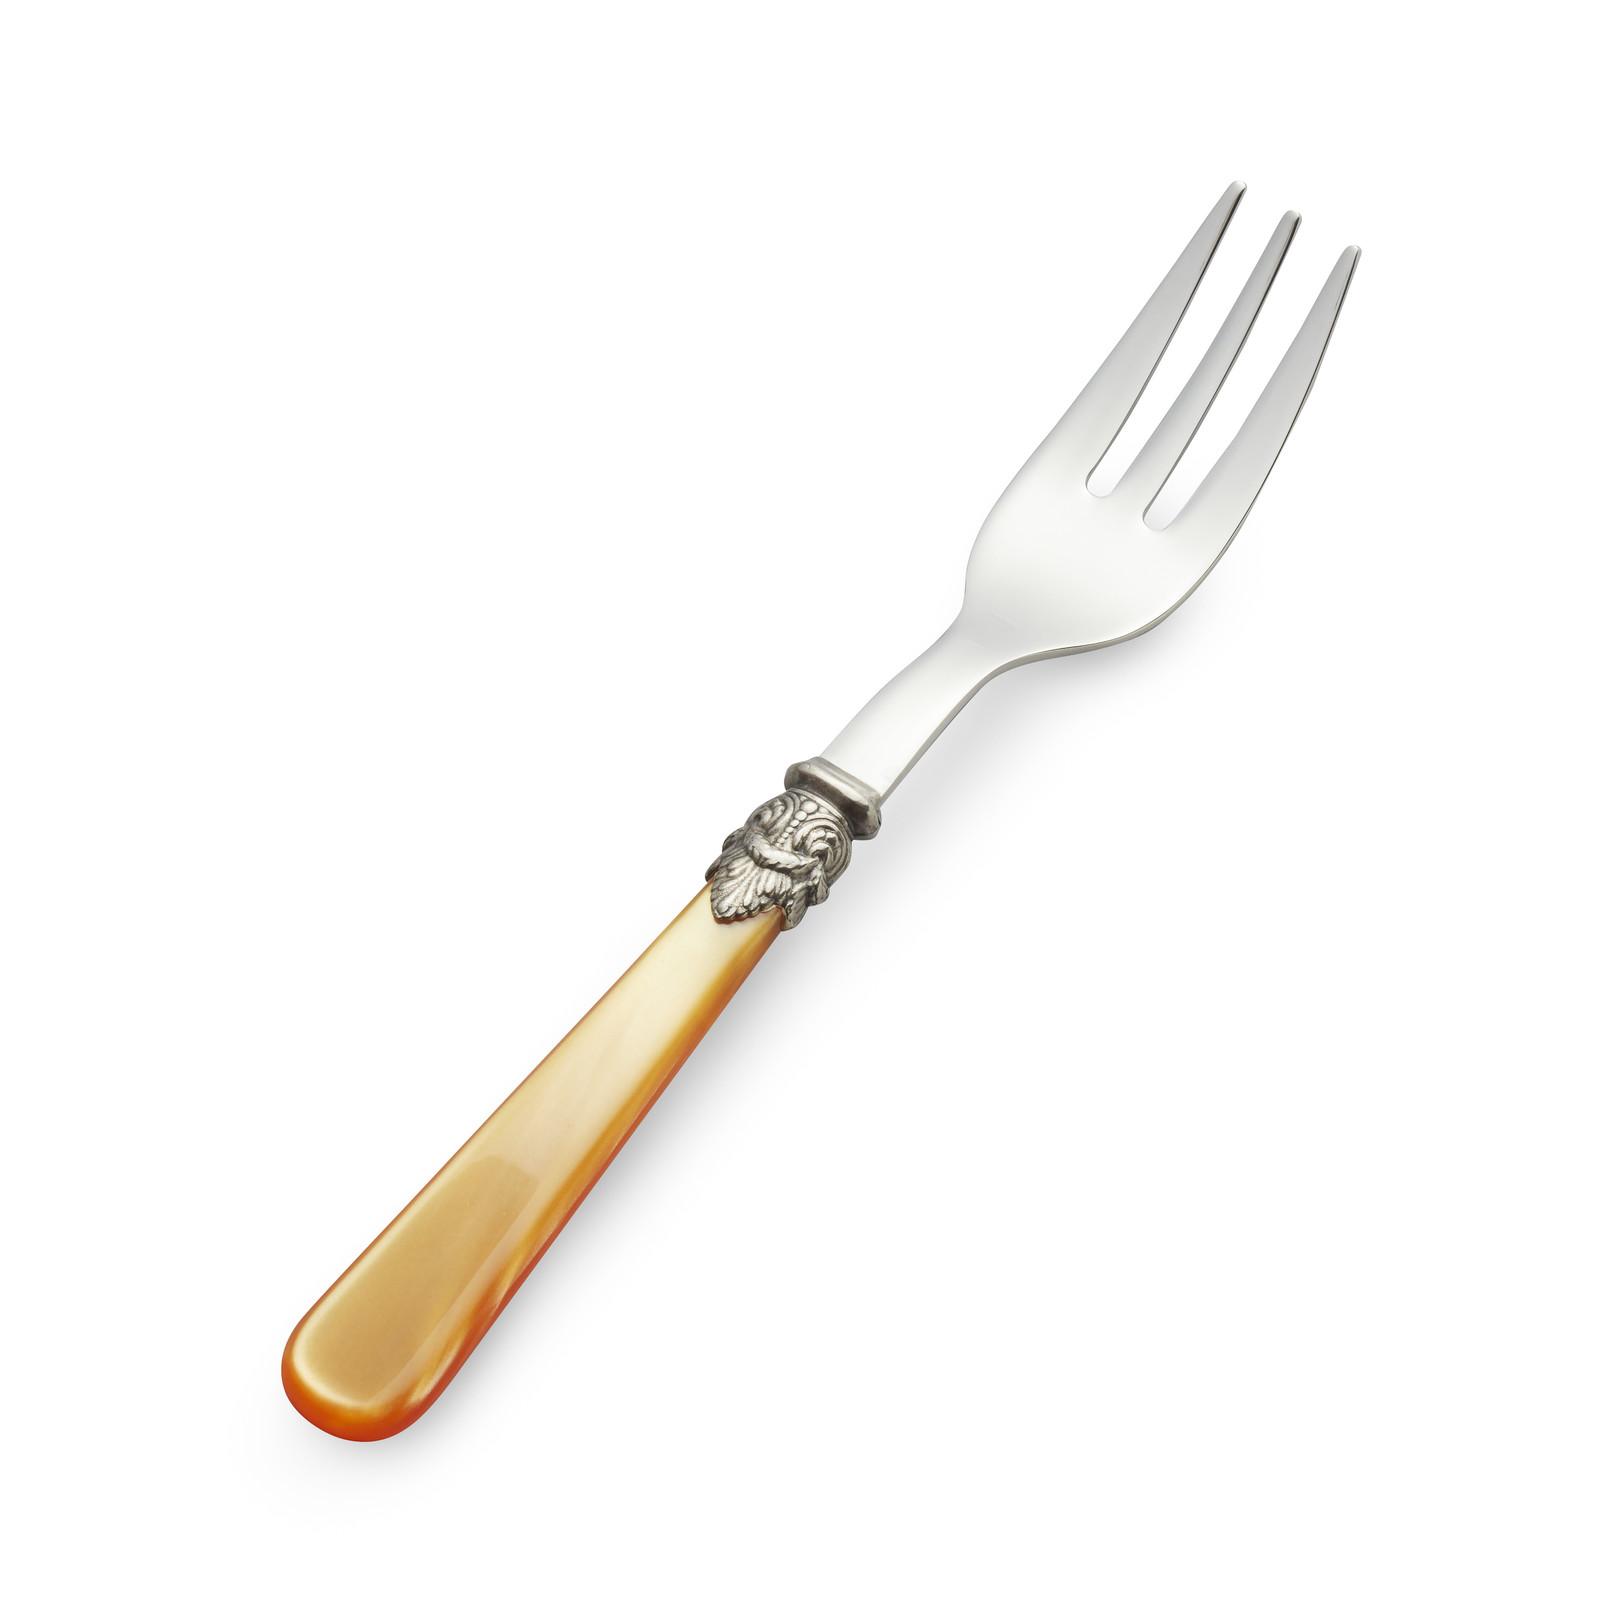 https://cdn.webshopapp.com/shops/295052/files/317620711/1600x1600x2/cake-fork-pastry-fork-orange-with-mother-of-pearl.jpg